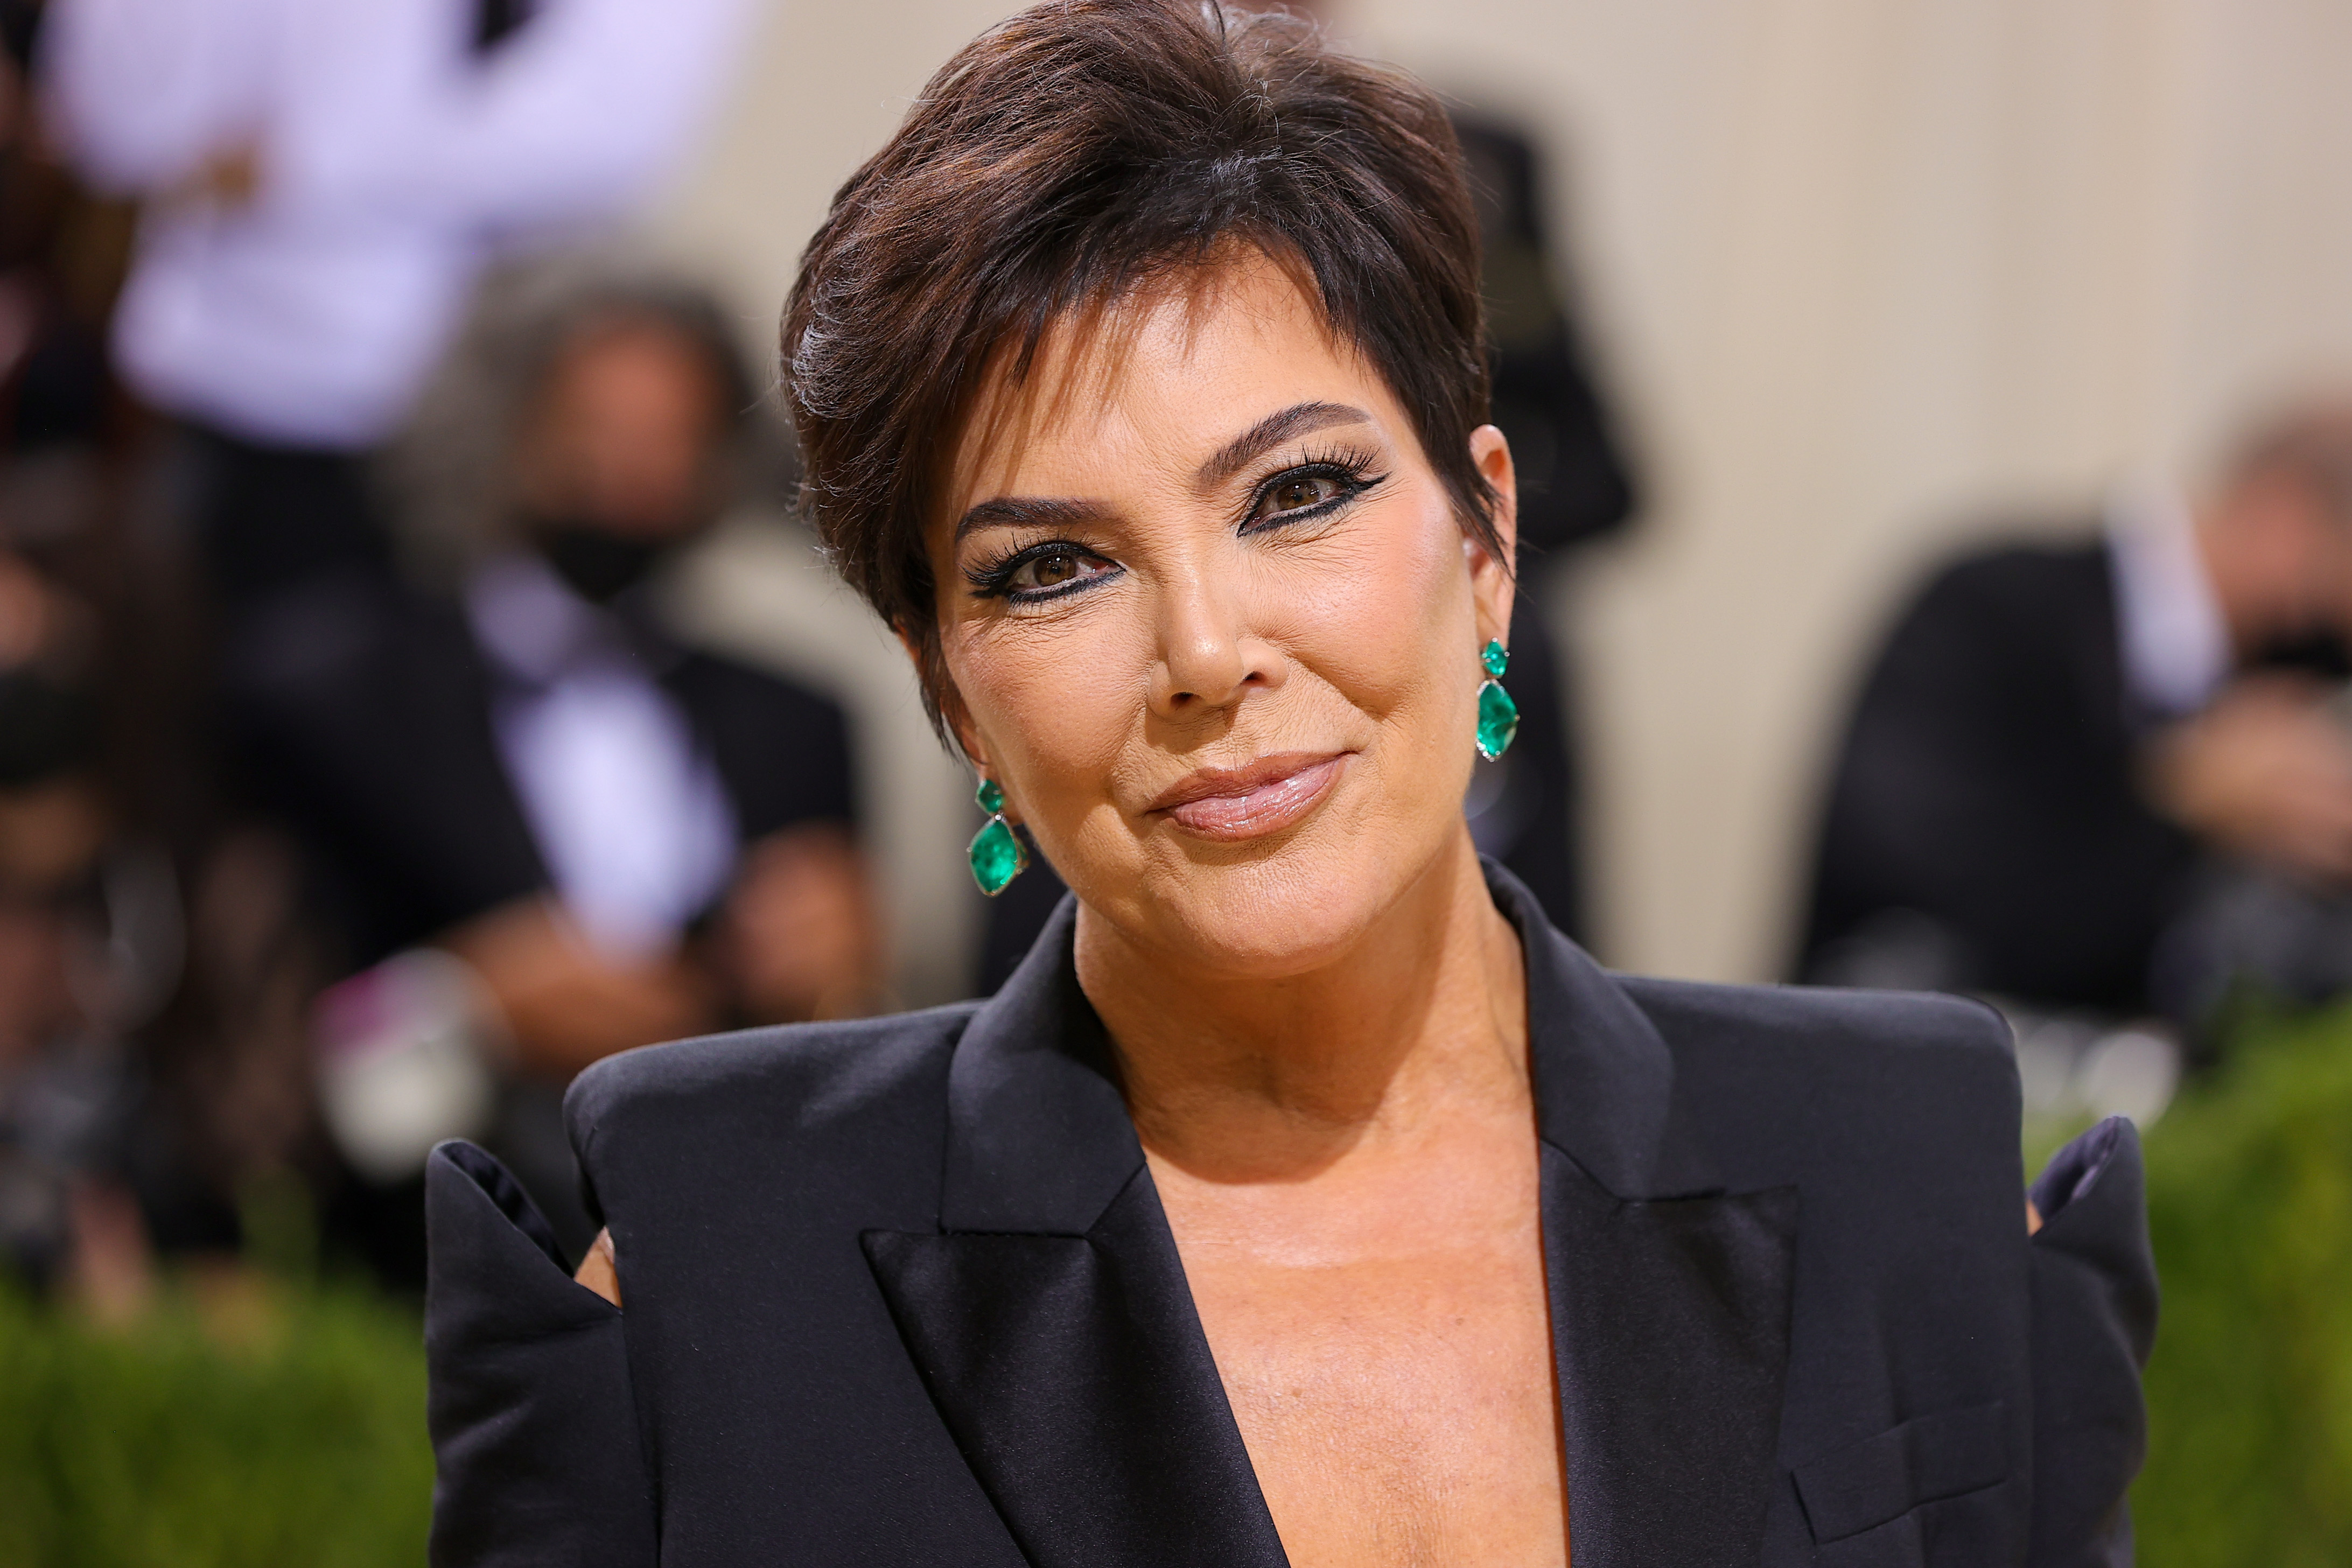 Kris Jenner at the Met Gala in 2021 | Source: Getty Images